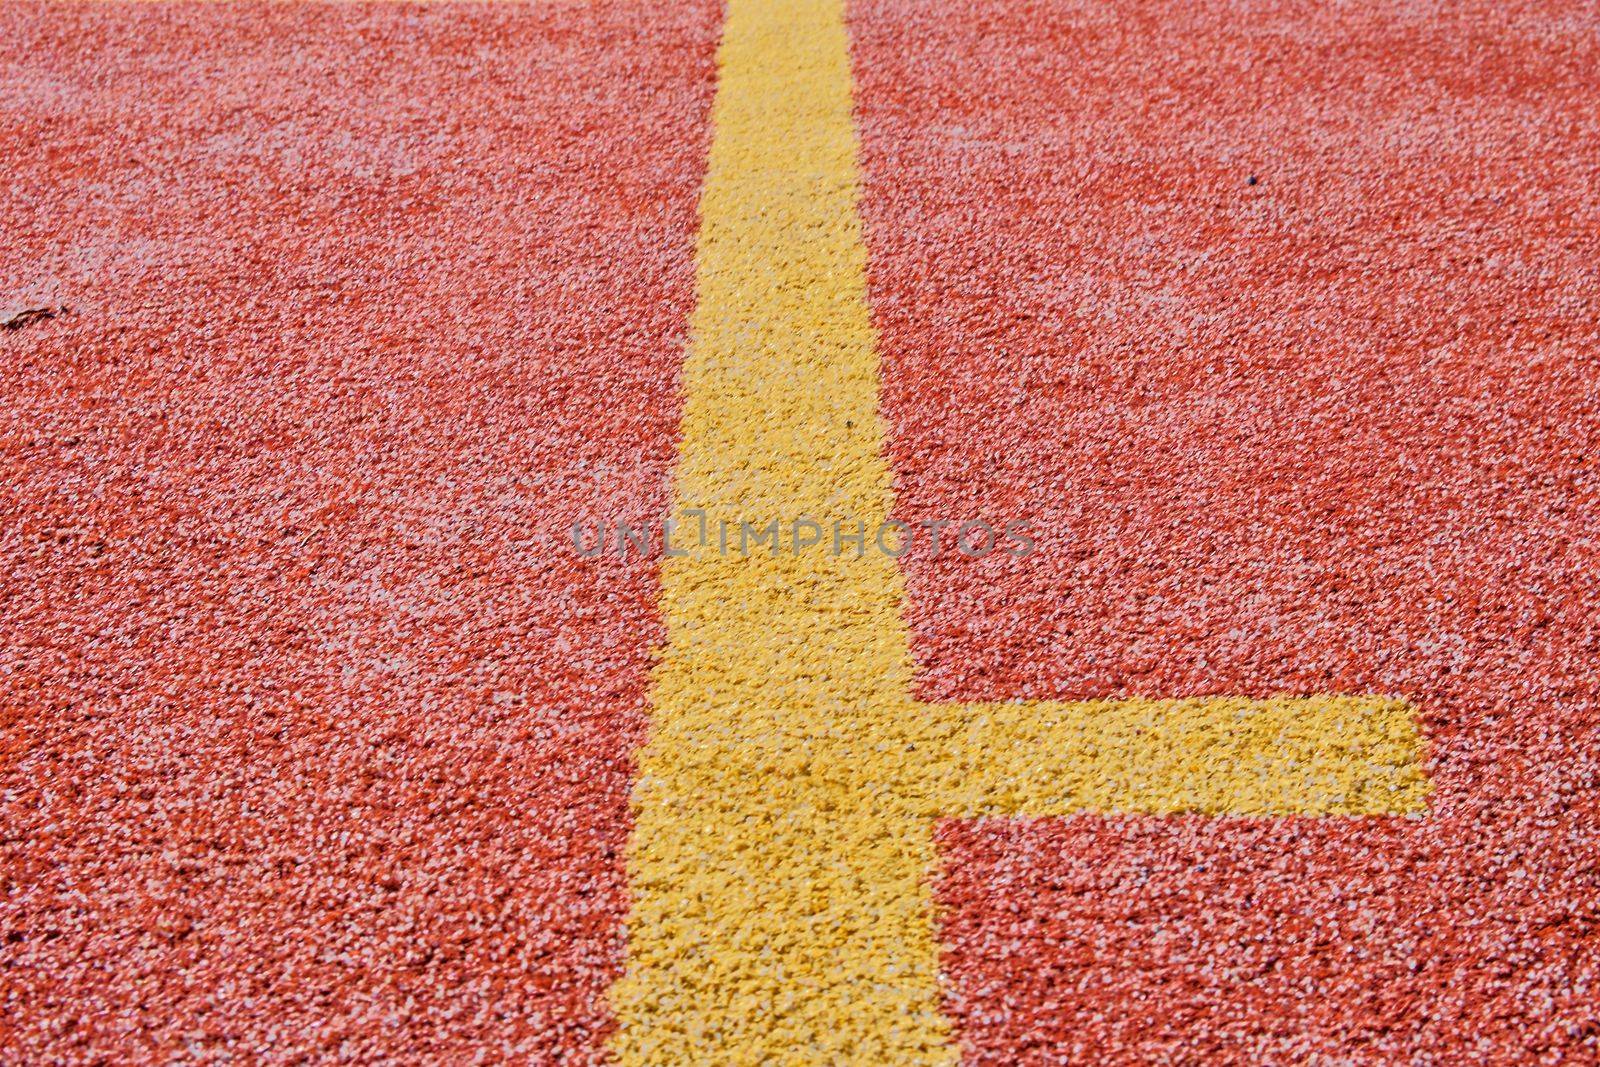 Yellow line on red playing field. Copy space. Sport texture and background. 